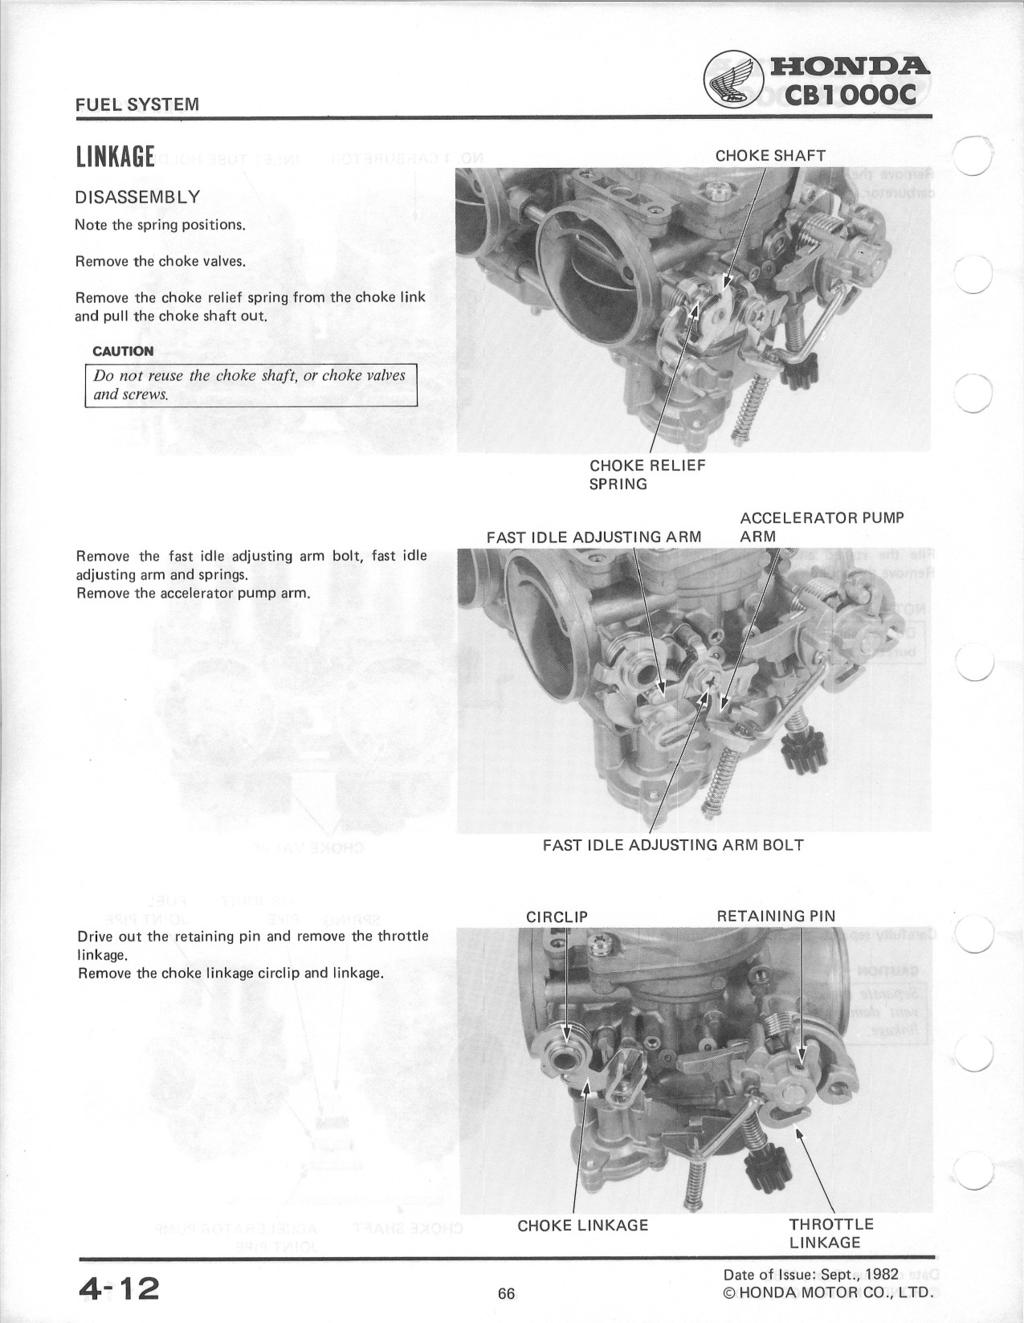 FUEL SYSTEM ~HONDA~ CB1000C LINKAGE CHOKE SHAFT DISASSEMBL Y Note the spring positions. Remove the choke valves. Remove the choke relief spring from the choke link and pull the choke shaft out.